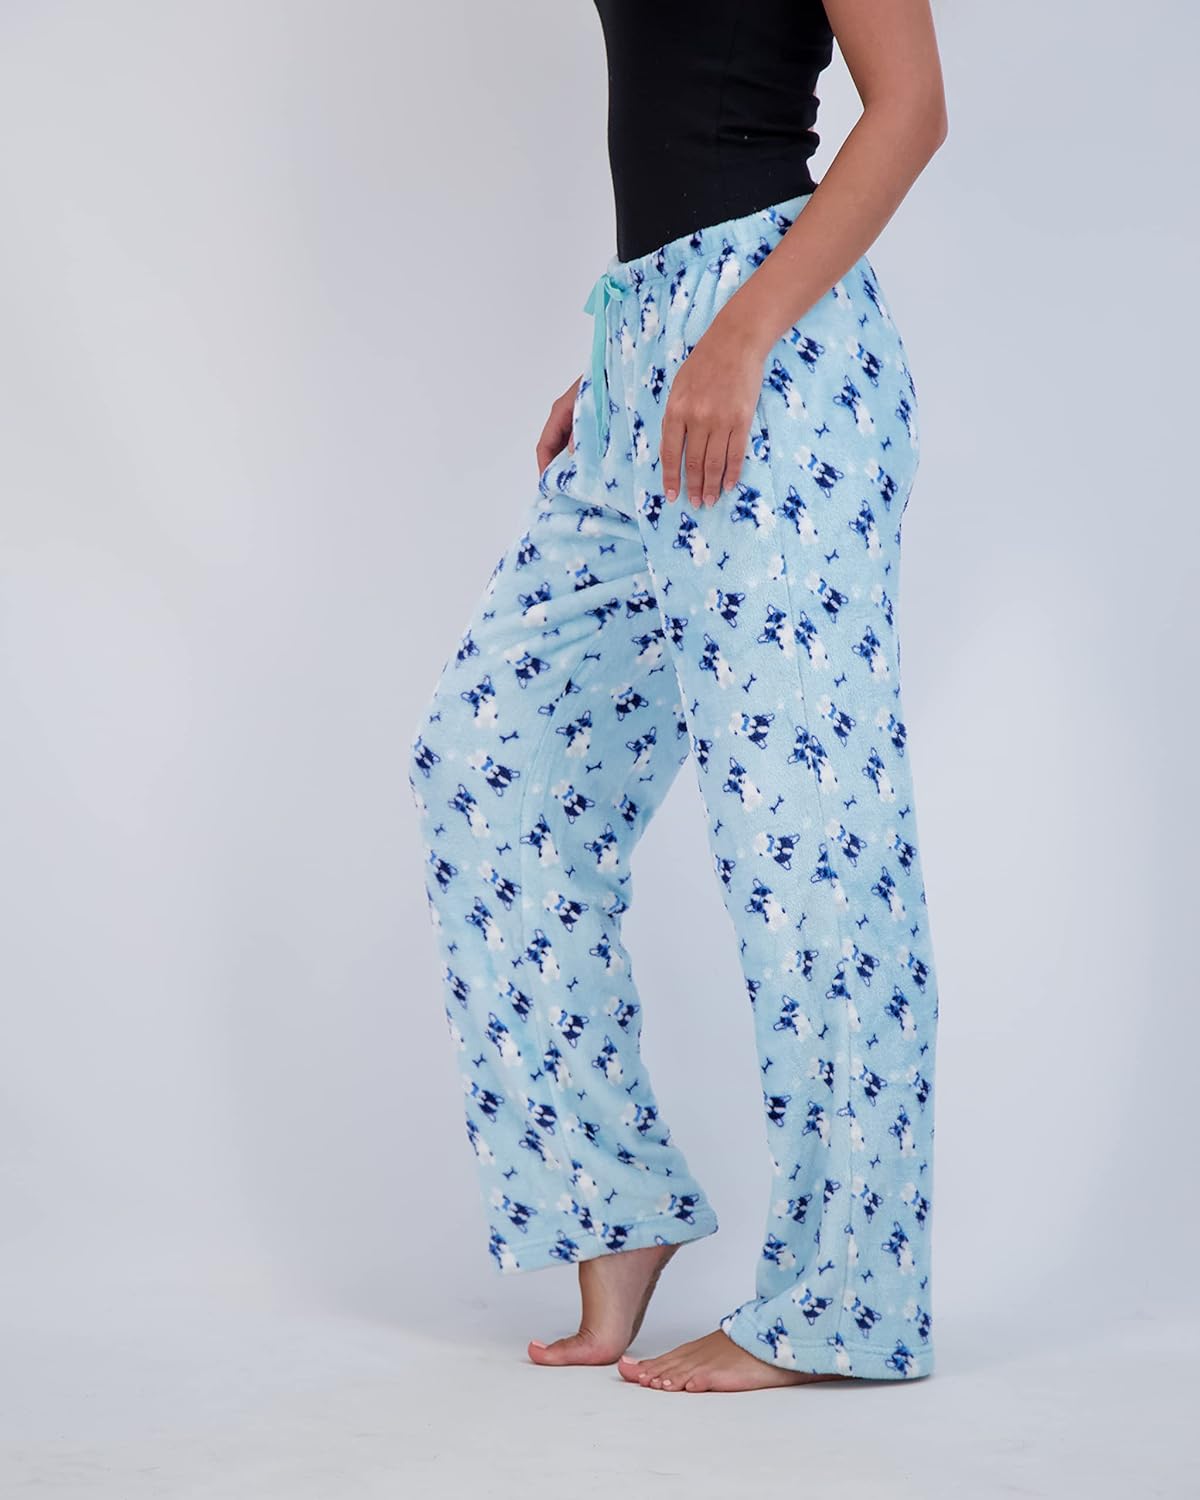 Forever 21 Women's Plush Sleep Pants - Soft & Cozy Pajamas for Women: A Review